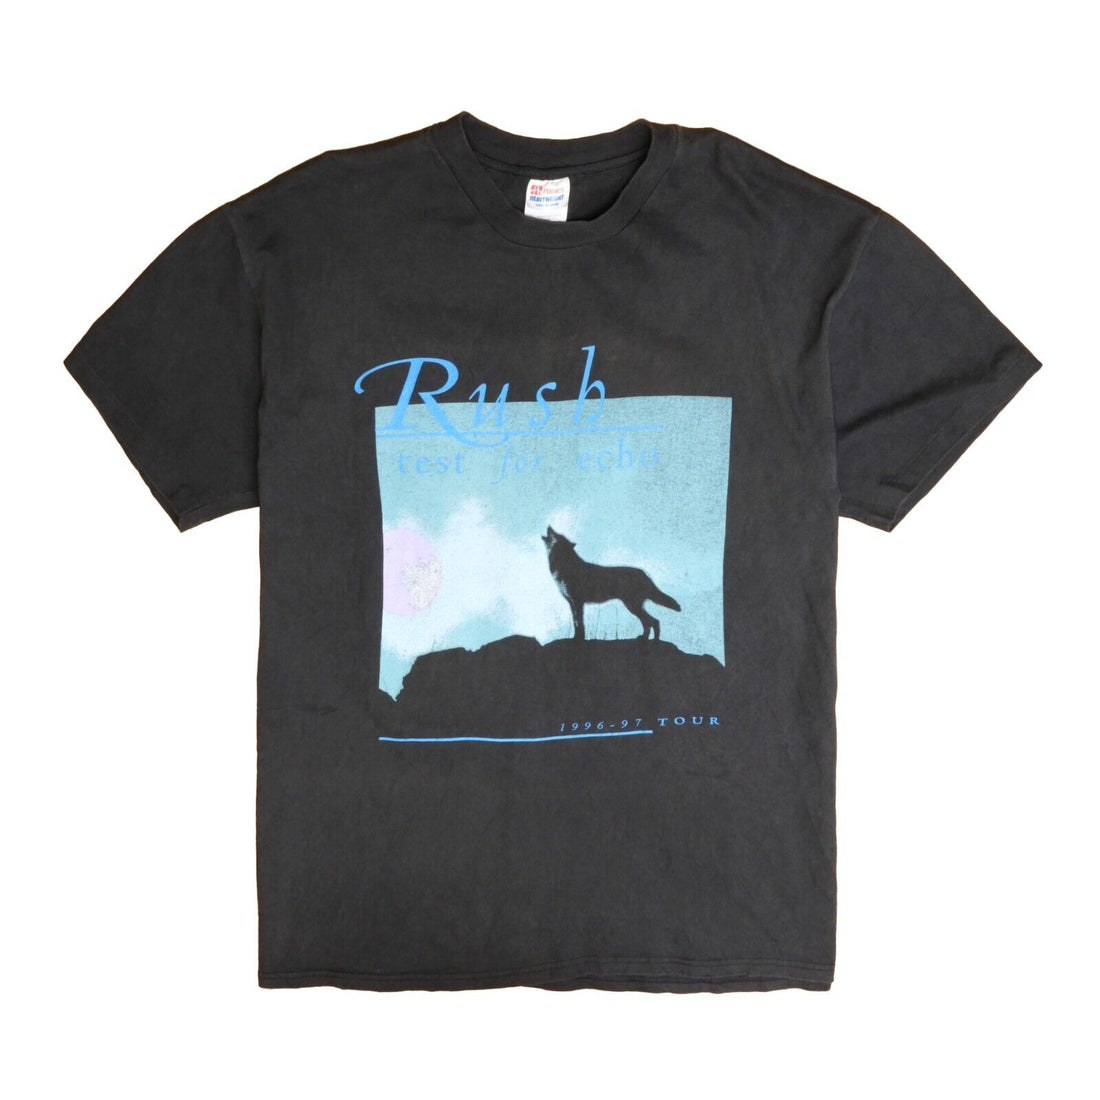 Vintage Rush Test For Echo Tour T-Shirt Size XL Black Band Tee 1997 90s